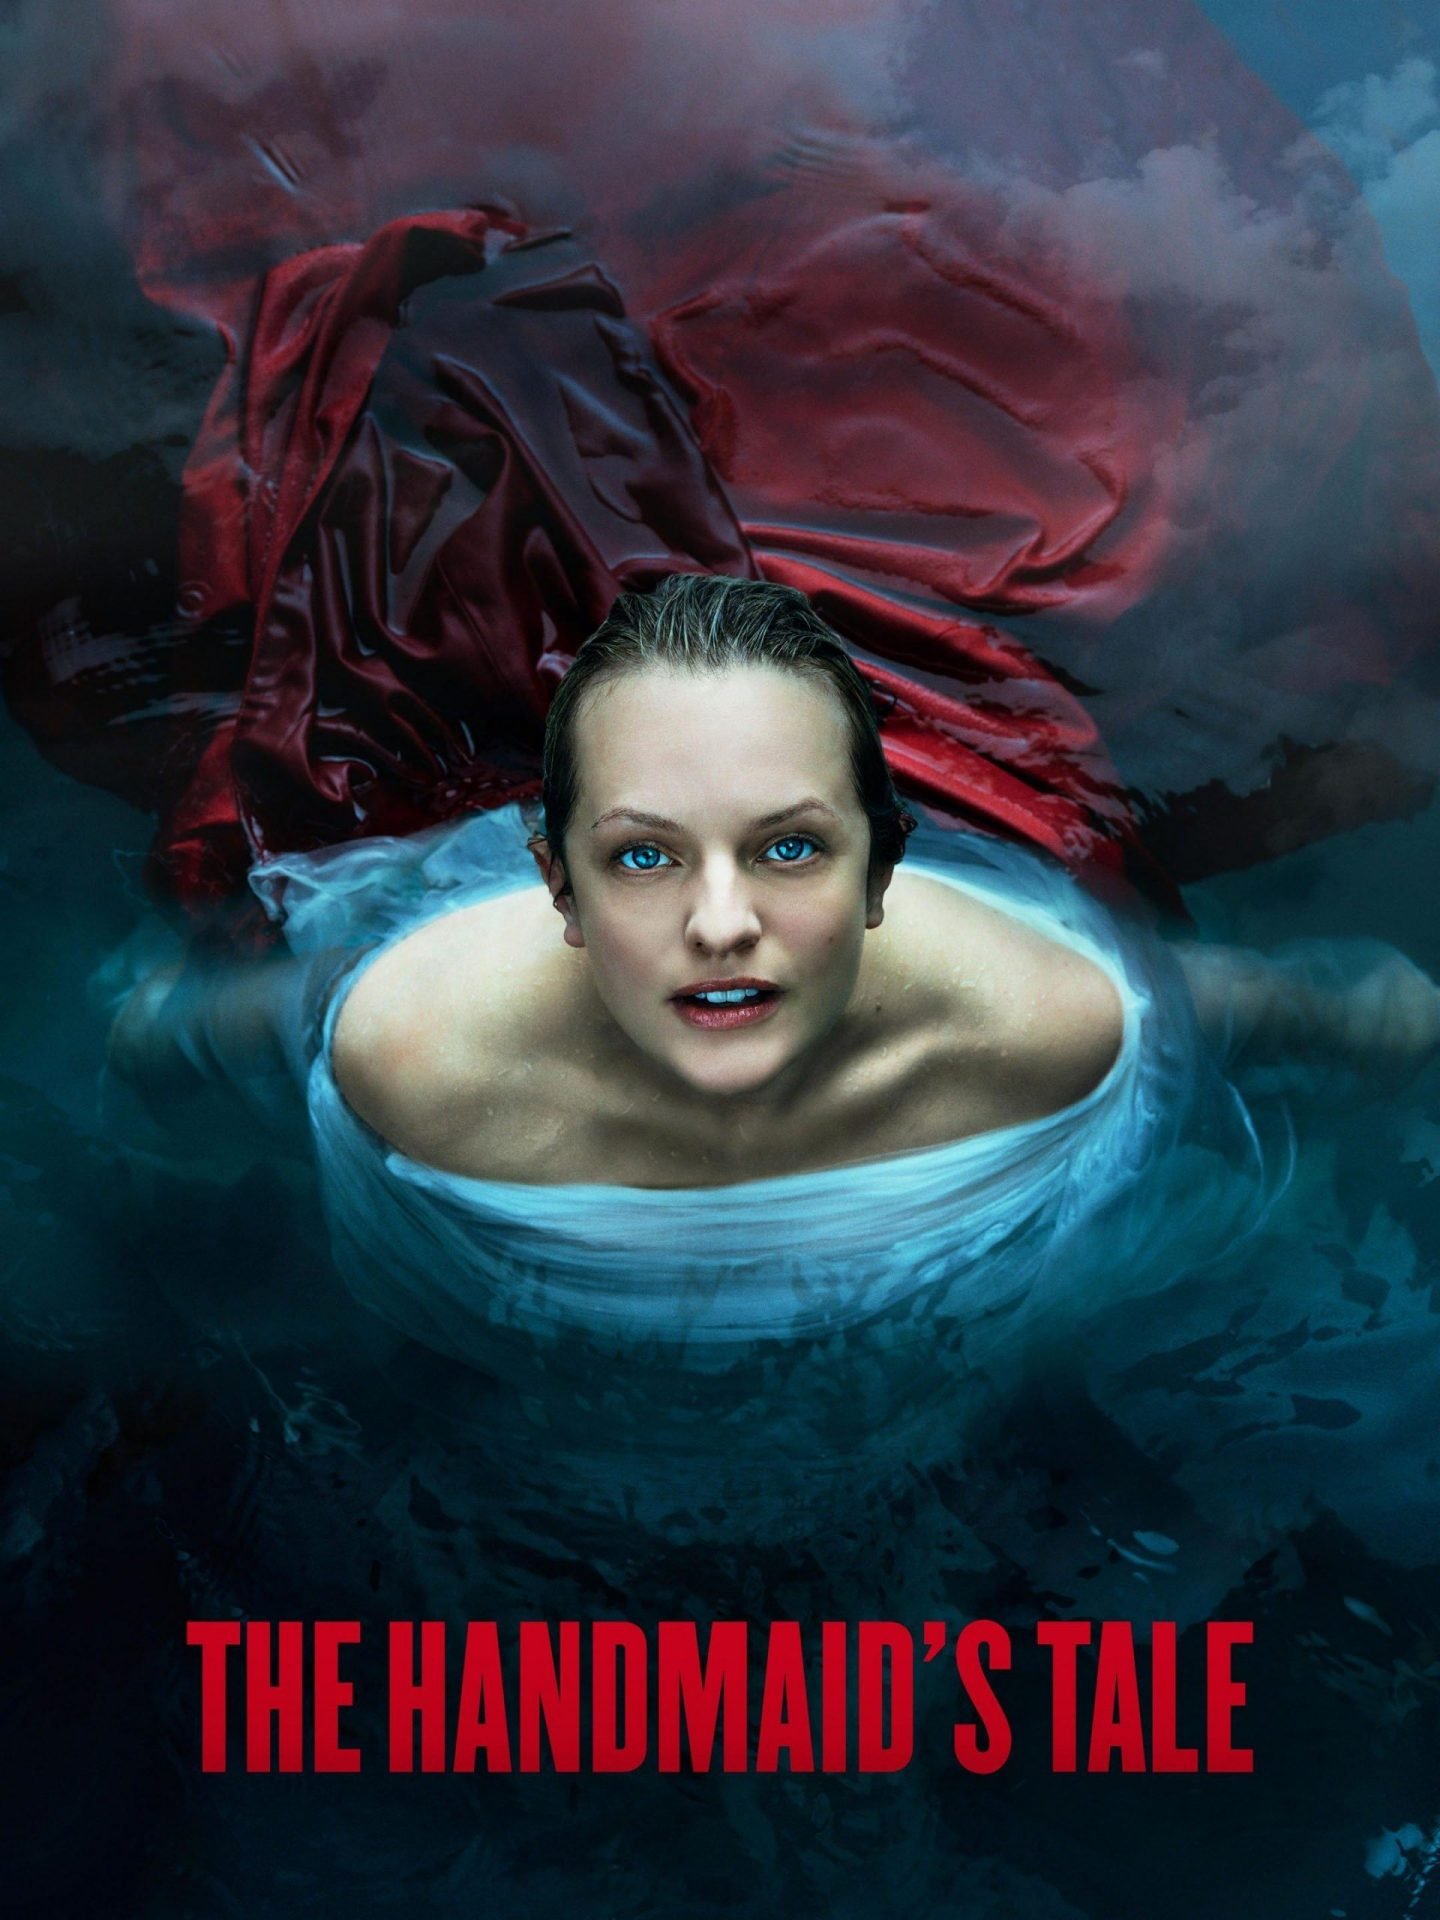 The Handmaids Tale Dystopian Film Review 1680648768689 Scaled